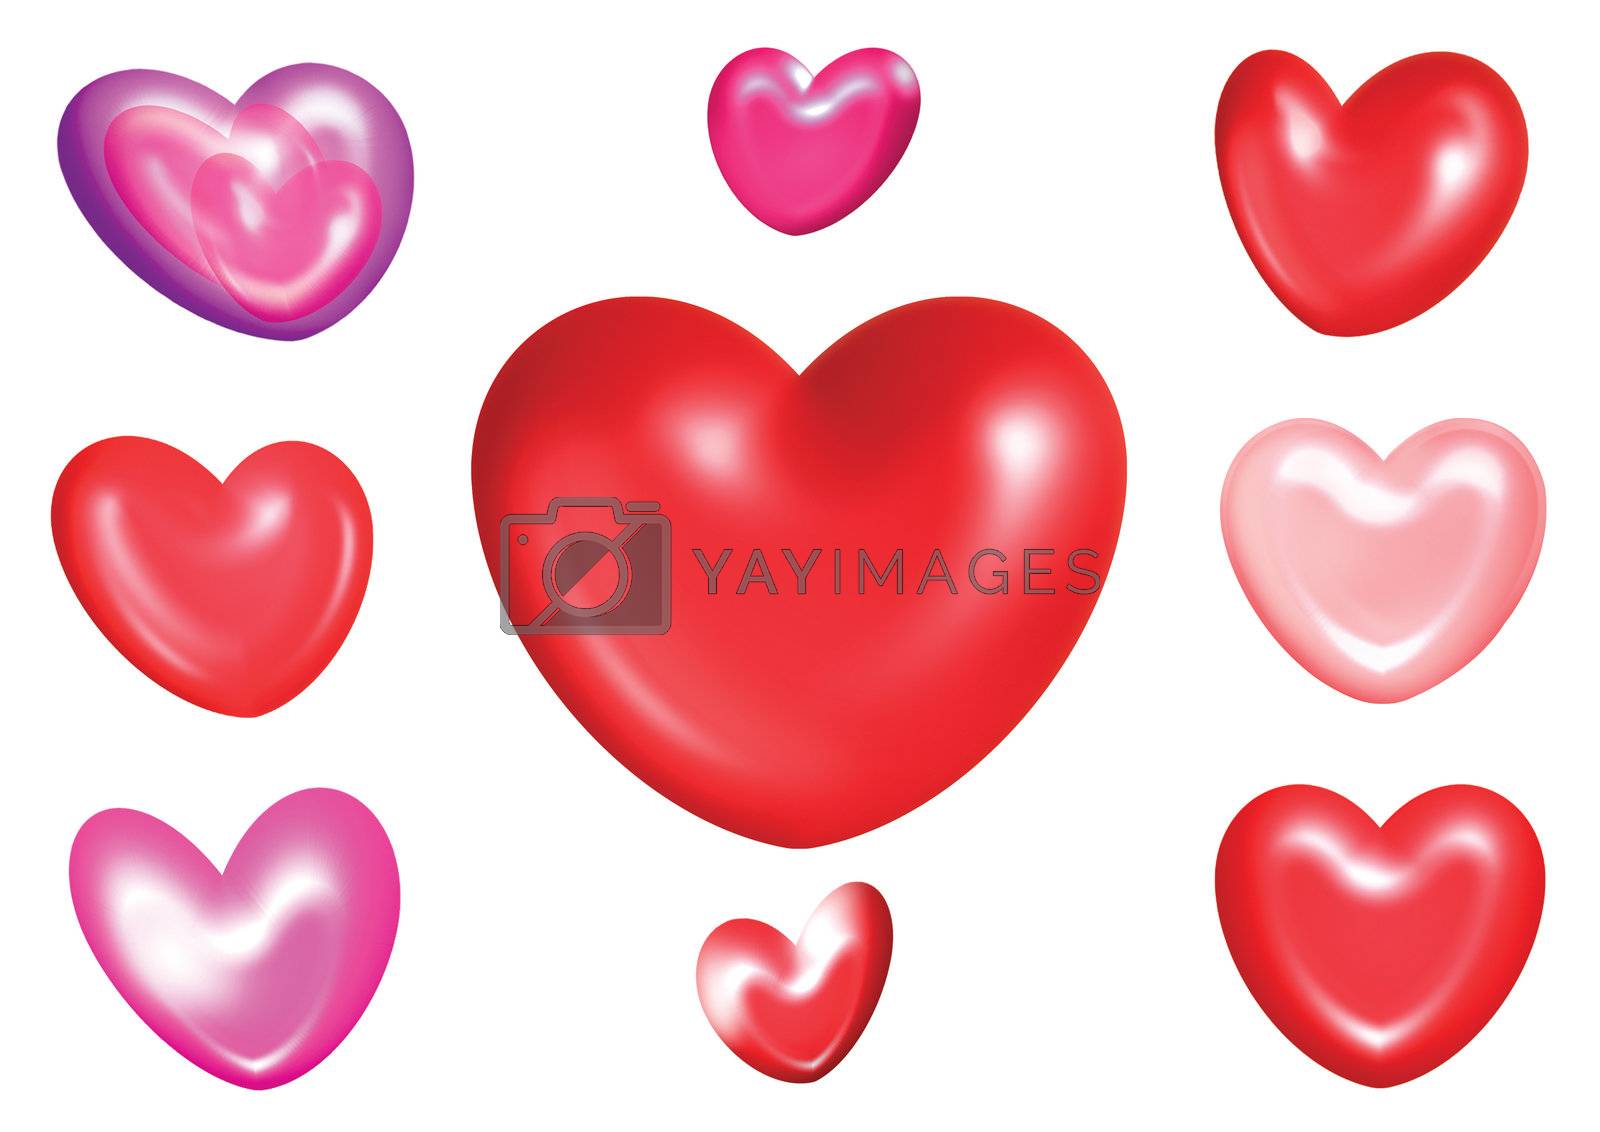 Royalty free image of love by yewkeo